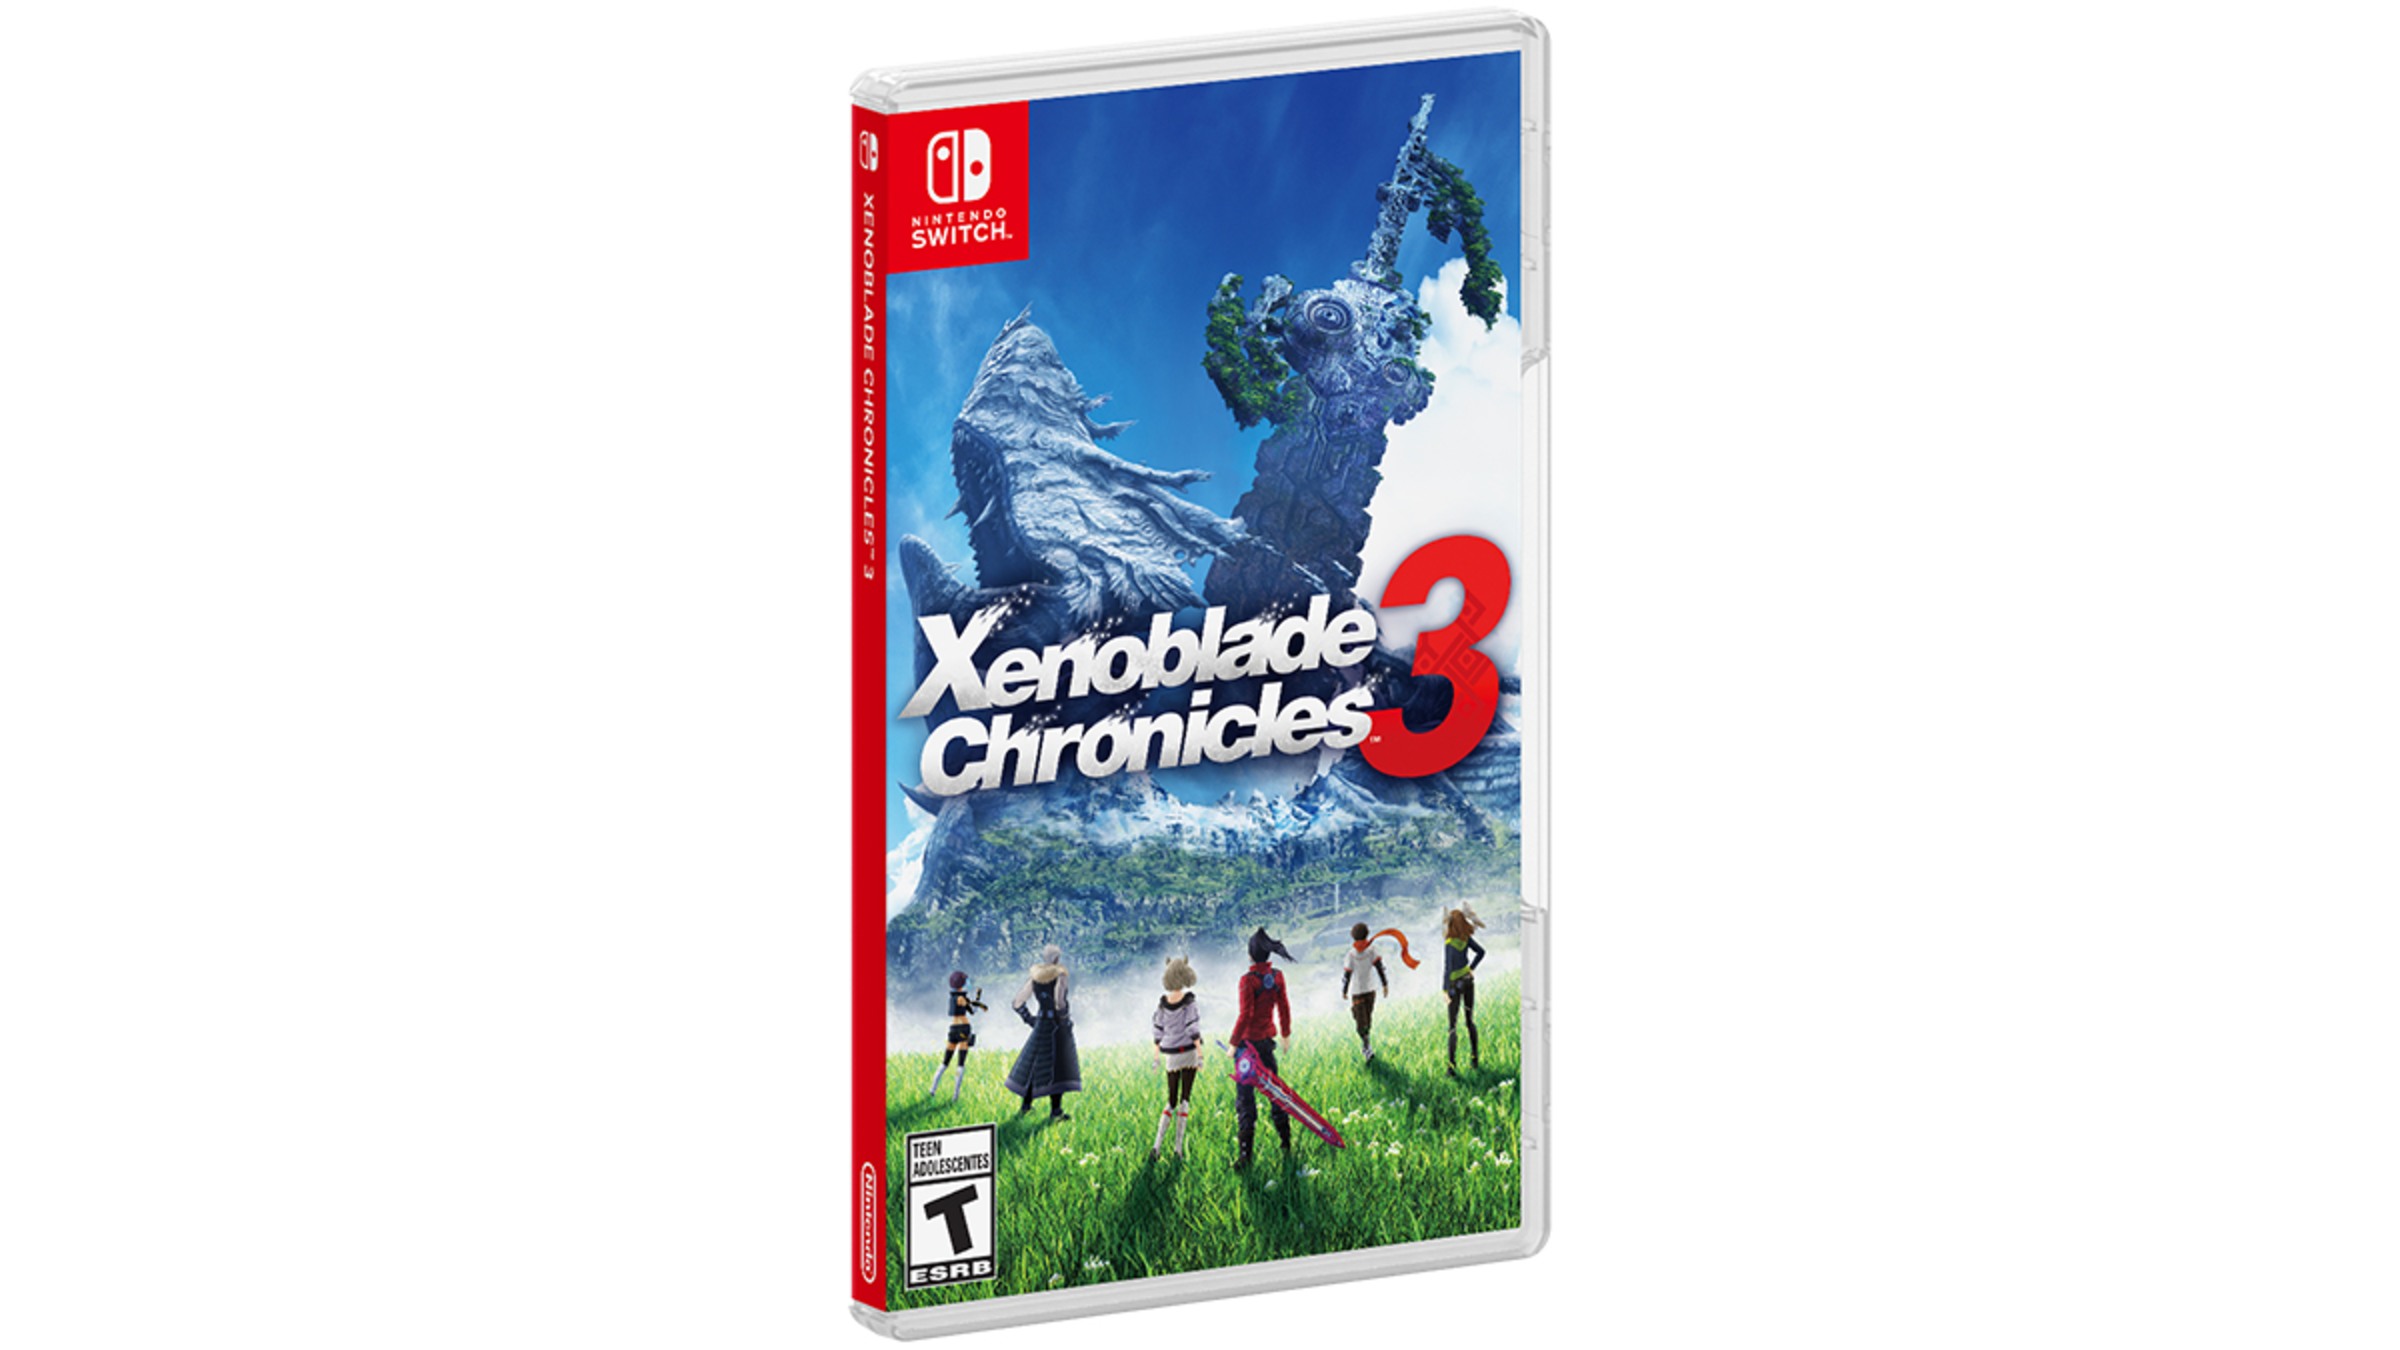 How to 100% complete Xenoblade Chronicles 3